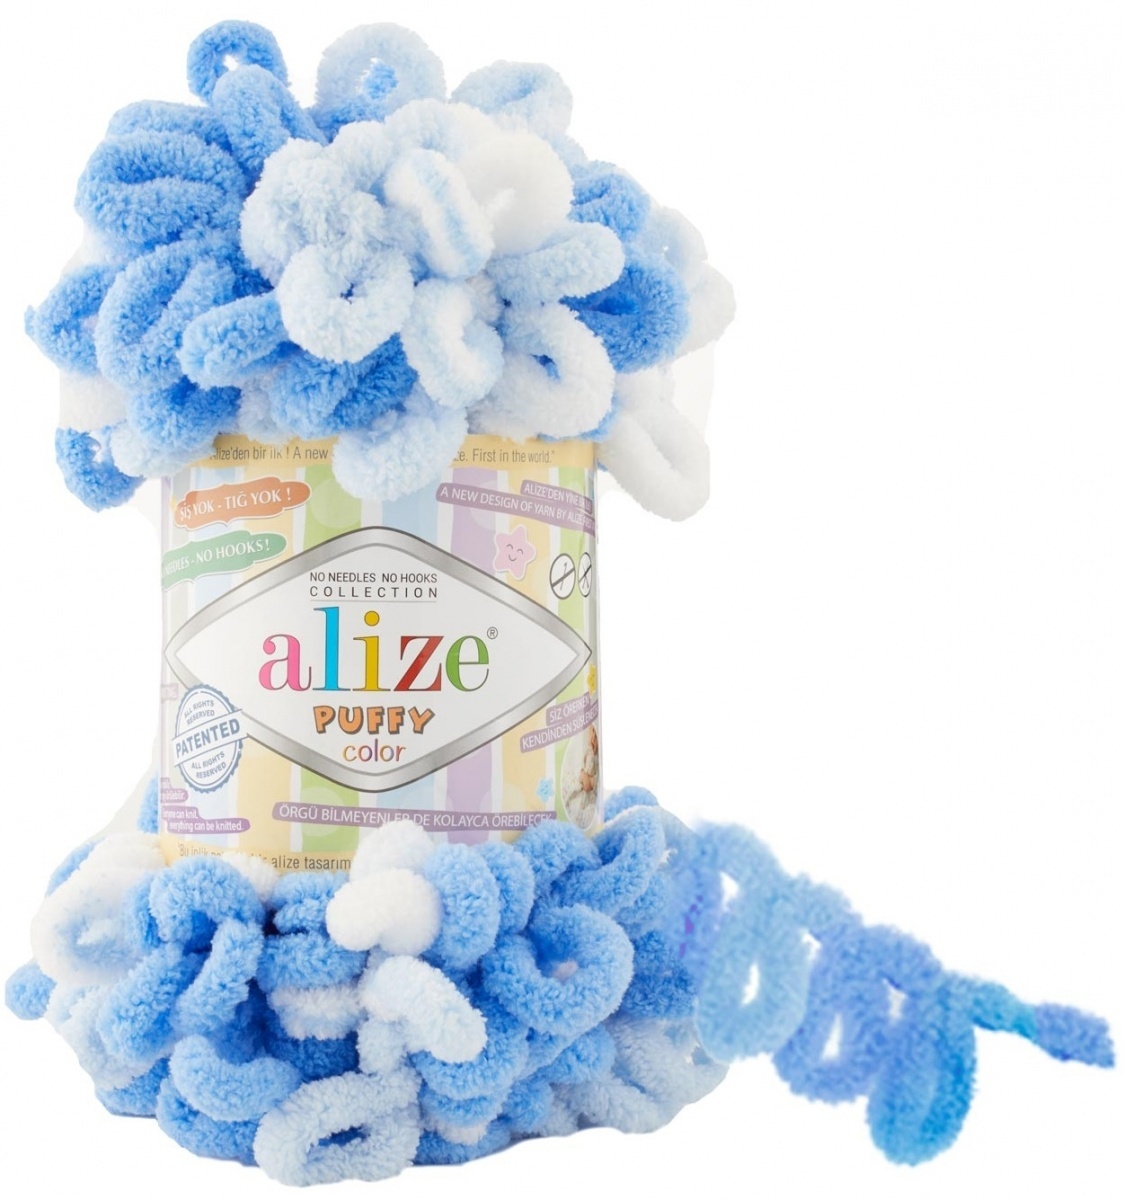 Alize Puffy Color, 100% Micropolyester 5 Skein Value Pack, 500g фото 58